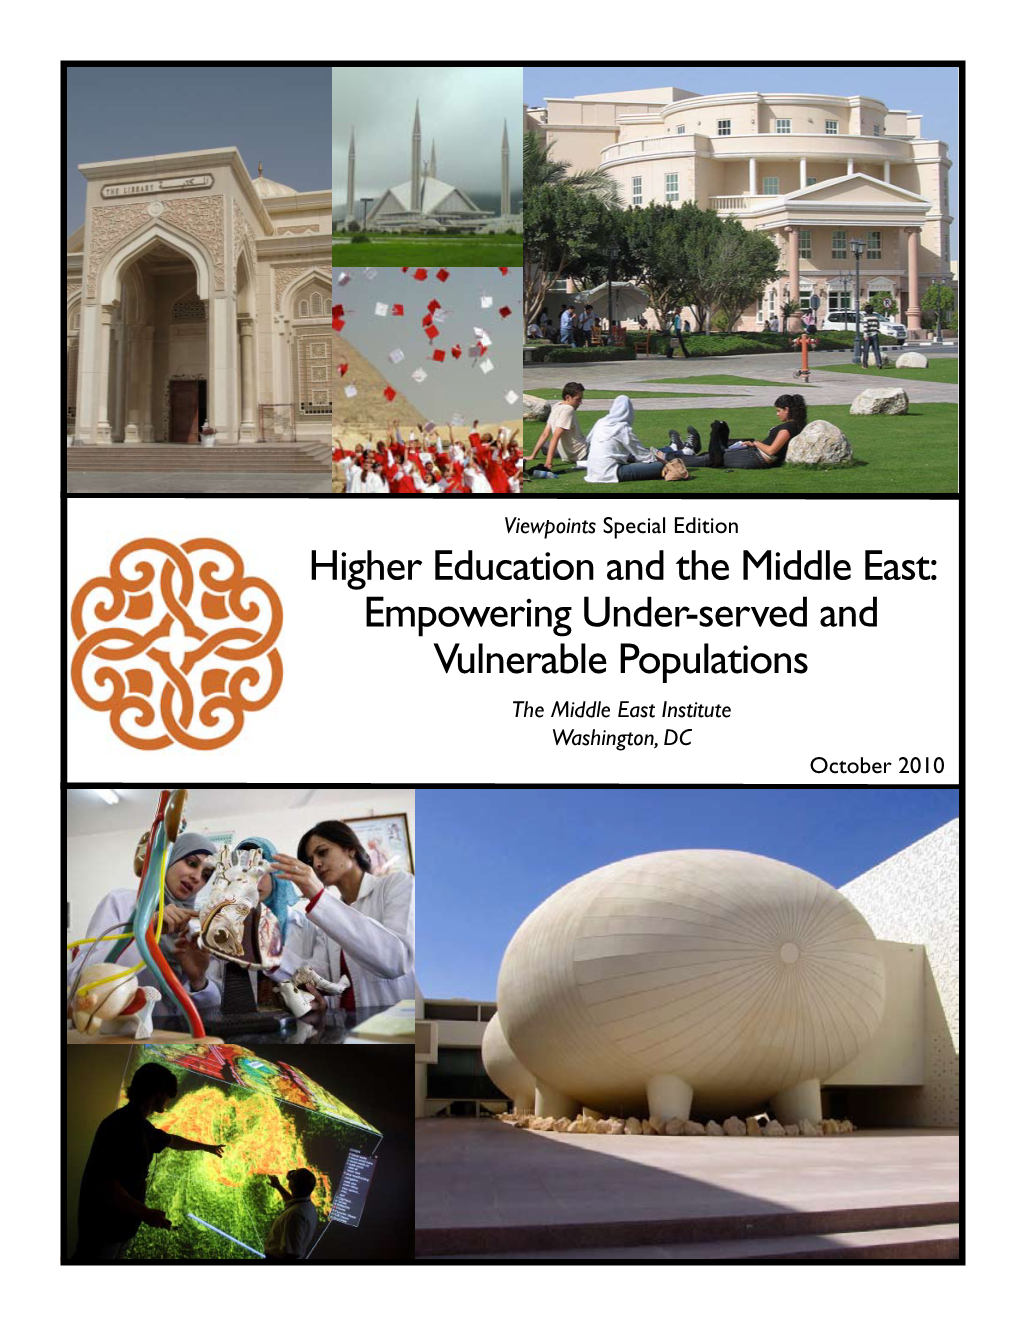 Higher Education and the Middle East, Volume II